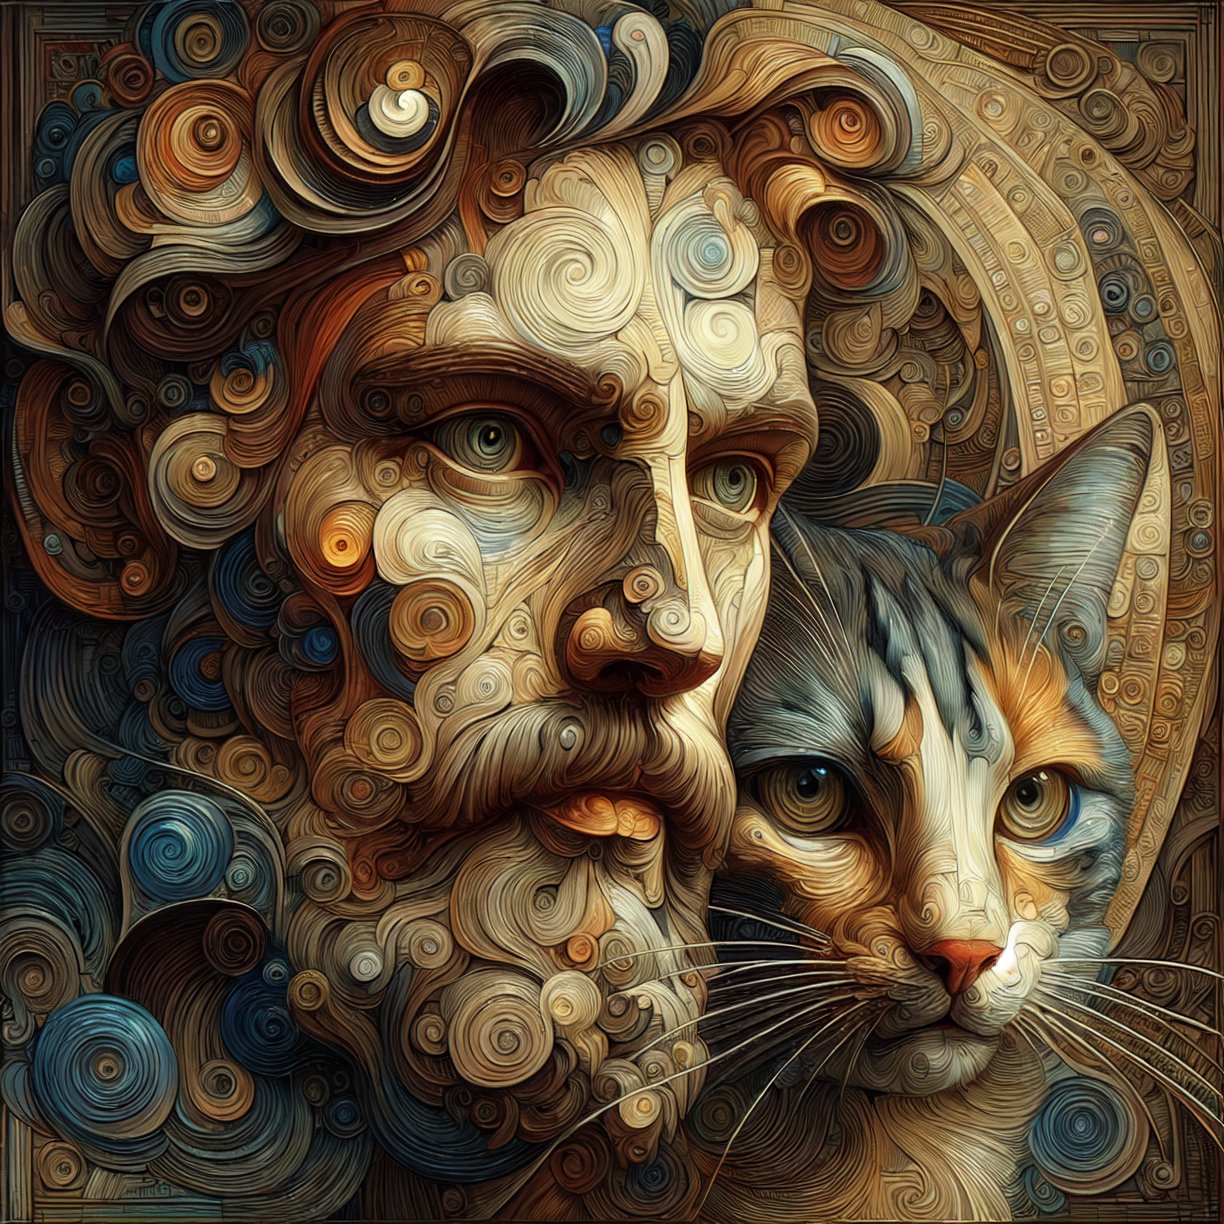 (An abstract depiction of a man's cat, rendered in the distinctive style of Caravaggio, evokes fragmented recollections, while the influence of Rembrandt emerges in the intricate, multi-layered figures, the interplay of contrasting tones, and the richly patterned imagery), detailed textures, high quality, high resolution, high Accuracy, realism, color correction, Proper lighting settings, harmonious composition, Behance works, minimalist hologram,
